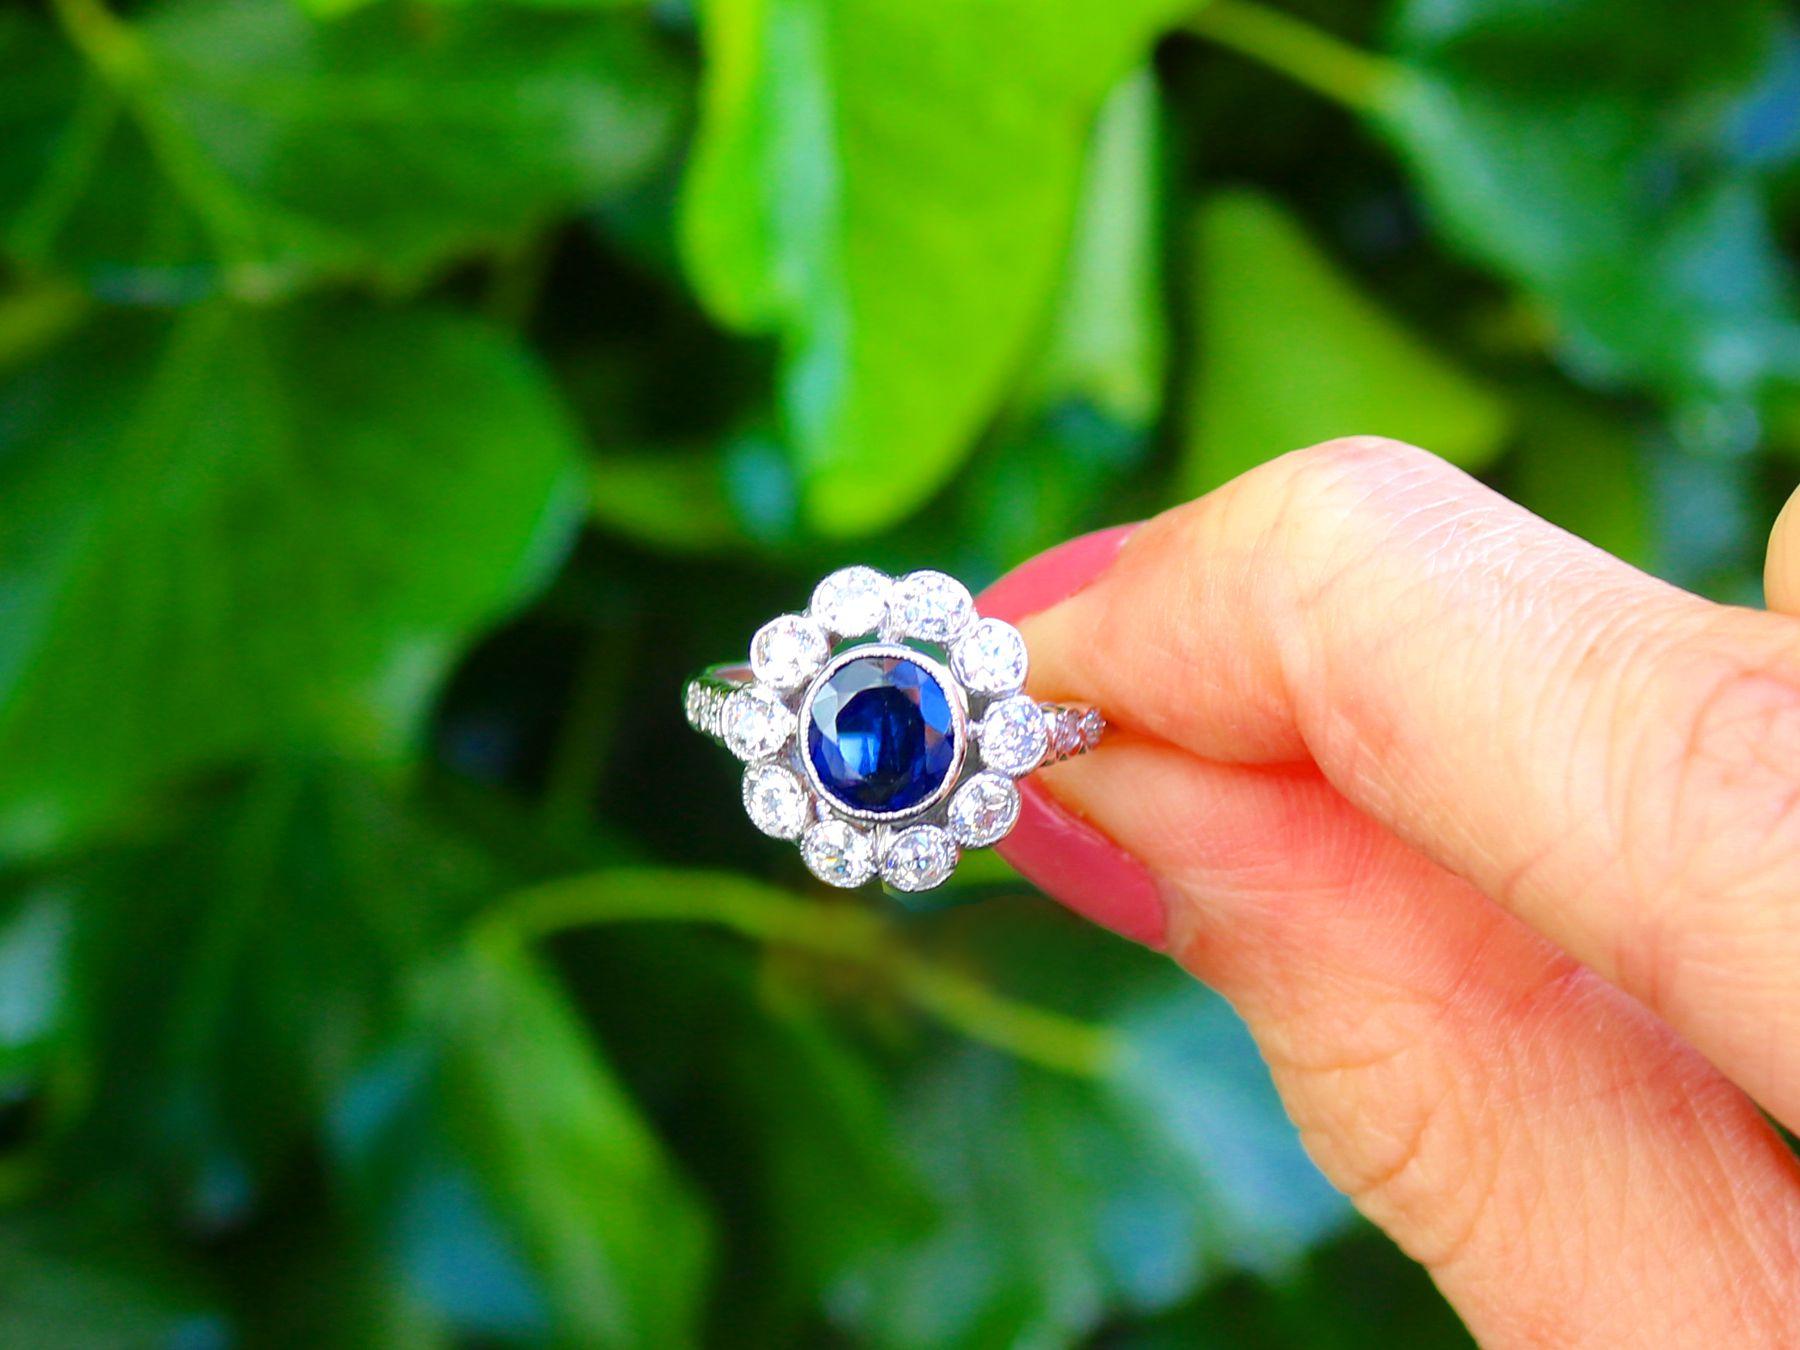 A stunning, fine and impressive 1.28 carat sapphire and 1.20 carat diamond, 18k white gold cocktail ring; part of our diverse antique jewelry and estate jewelry collections.

This fine and impressive 1920s white gold sapphire diamond ring has been